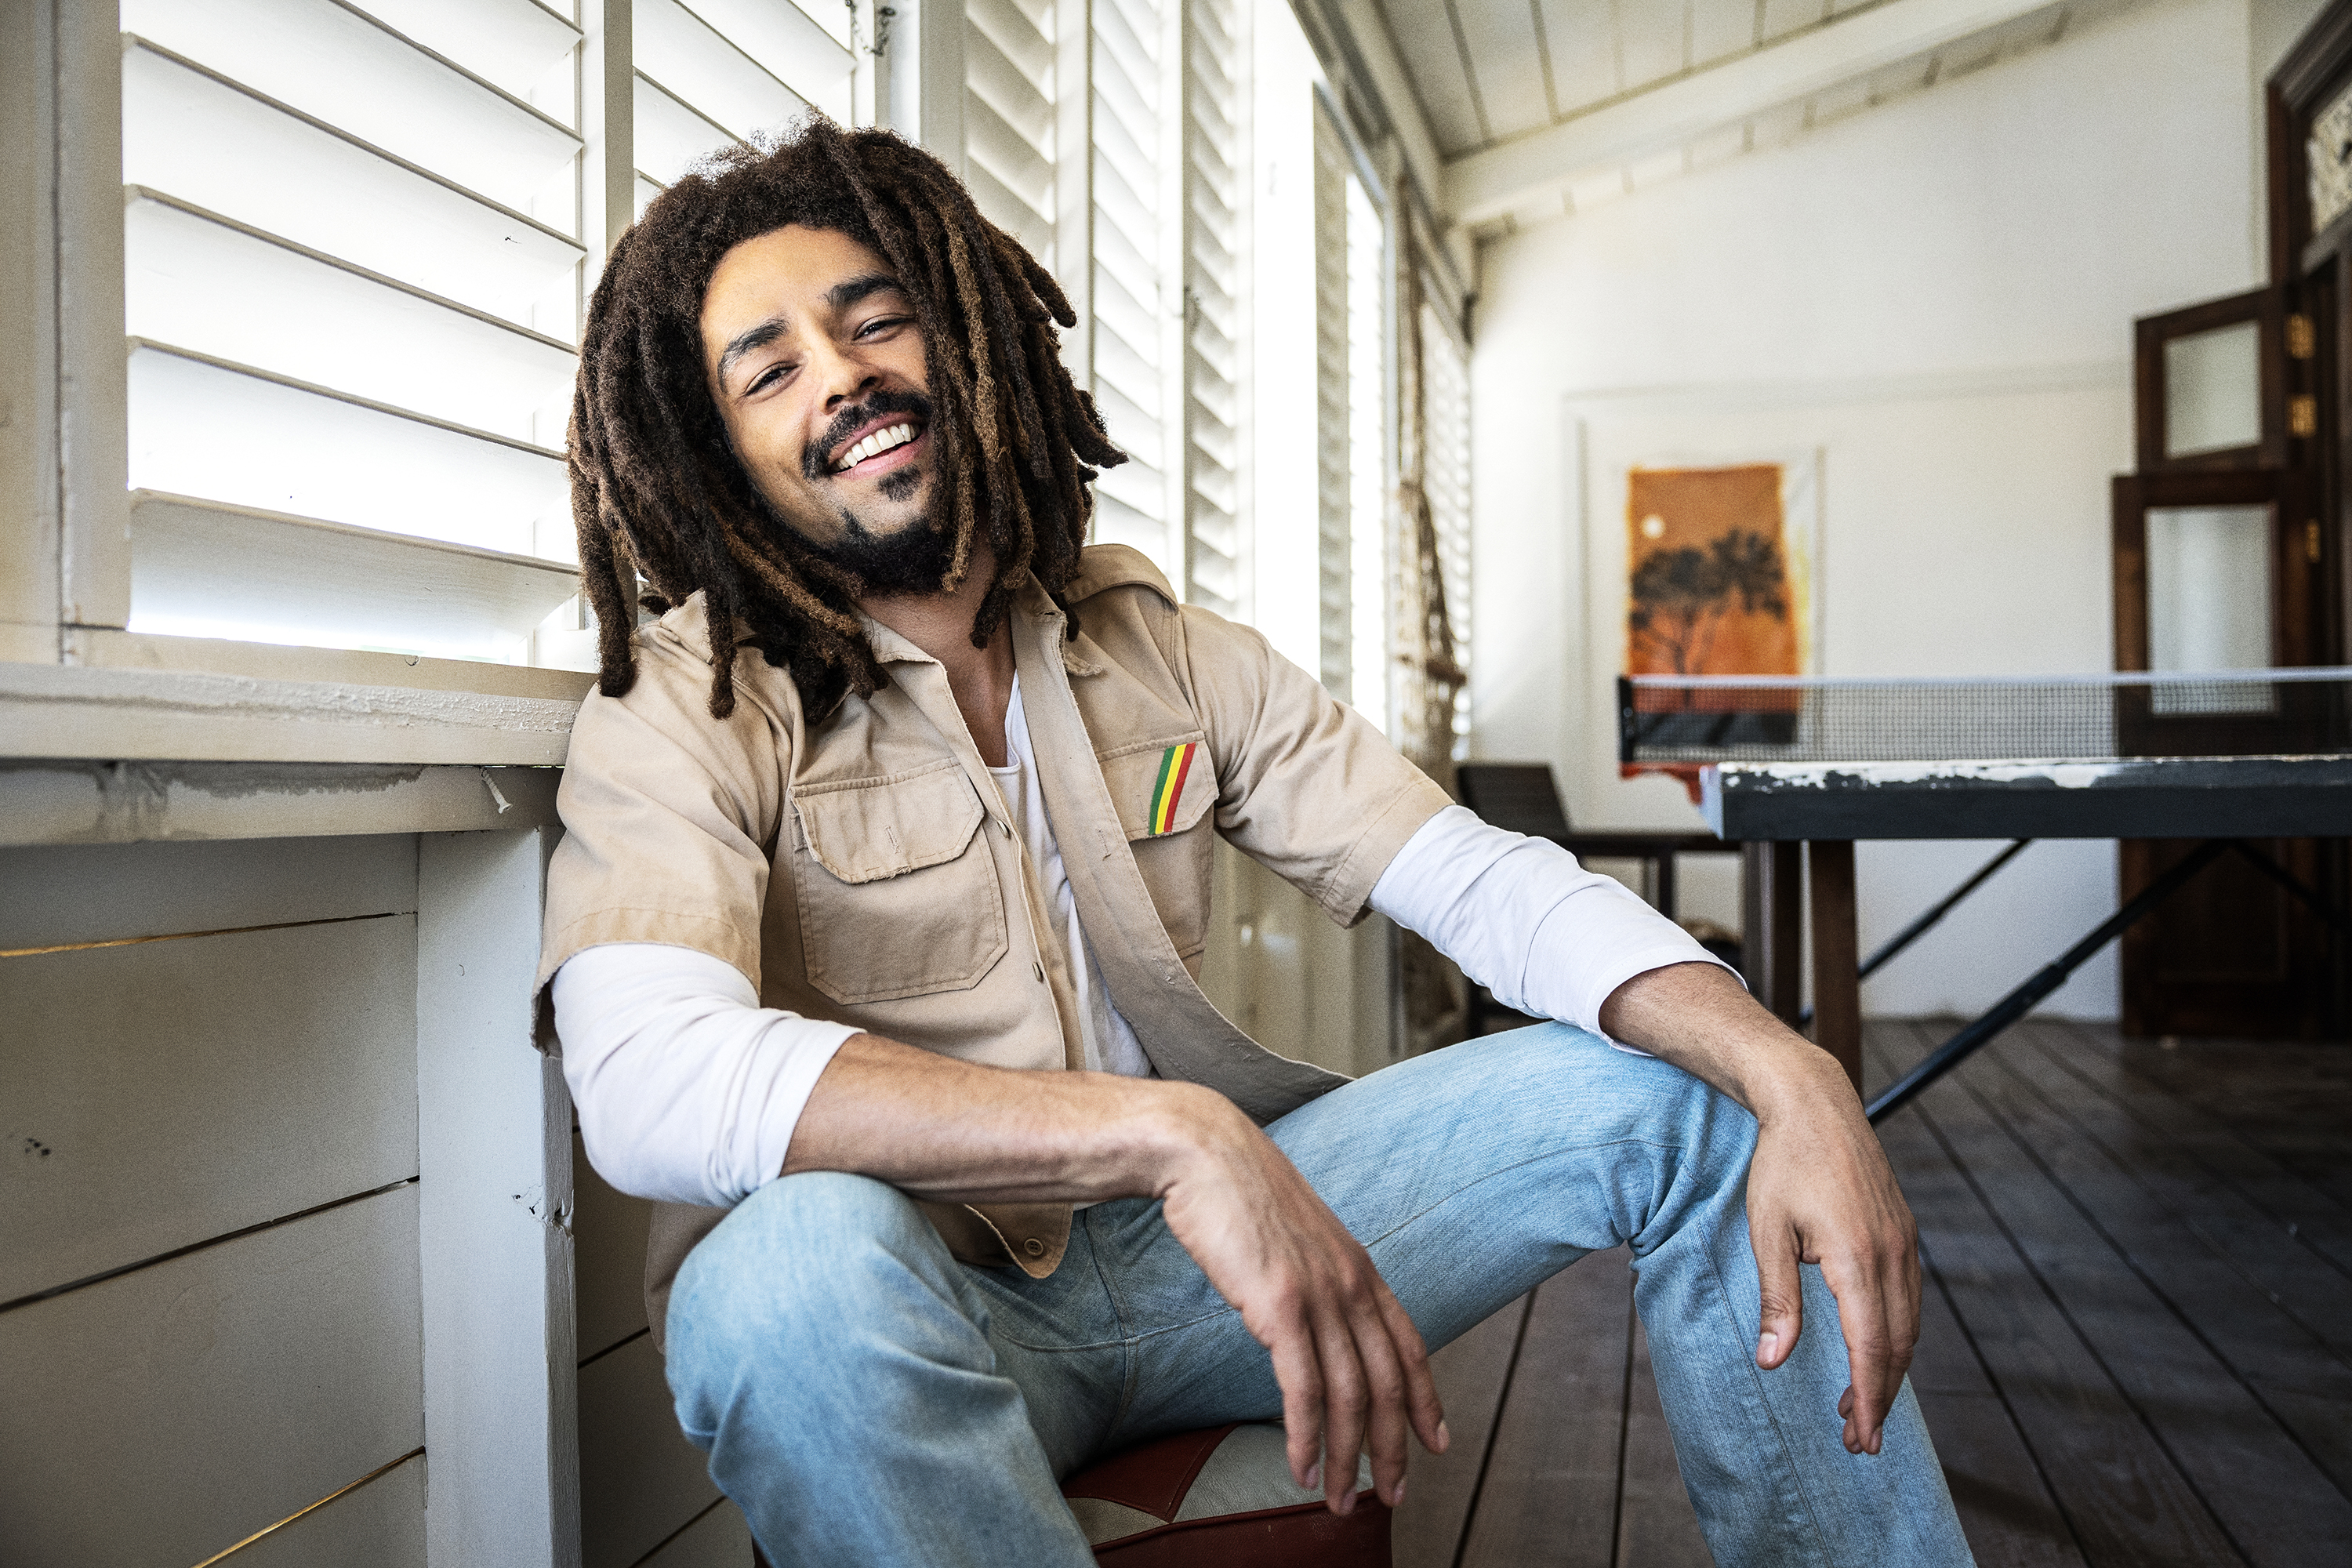 <p>It was the sleeper hit that no one saw coming: "Bob Marley: One Love" banked $177M on a $70M budget after it opened in theaters on Valentine's Day. "Barbie" actor Kingsley Ben-Adir stars as the titular reggae pioneer in the biopic, which may have tanked with critics, scoring a 43% rotten rating on Rotten Tomatoes, but made a major impression with audiences, who gave it a 92% fresh rating.</p>